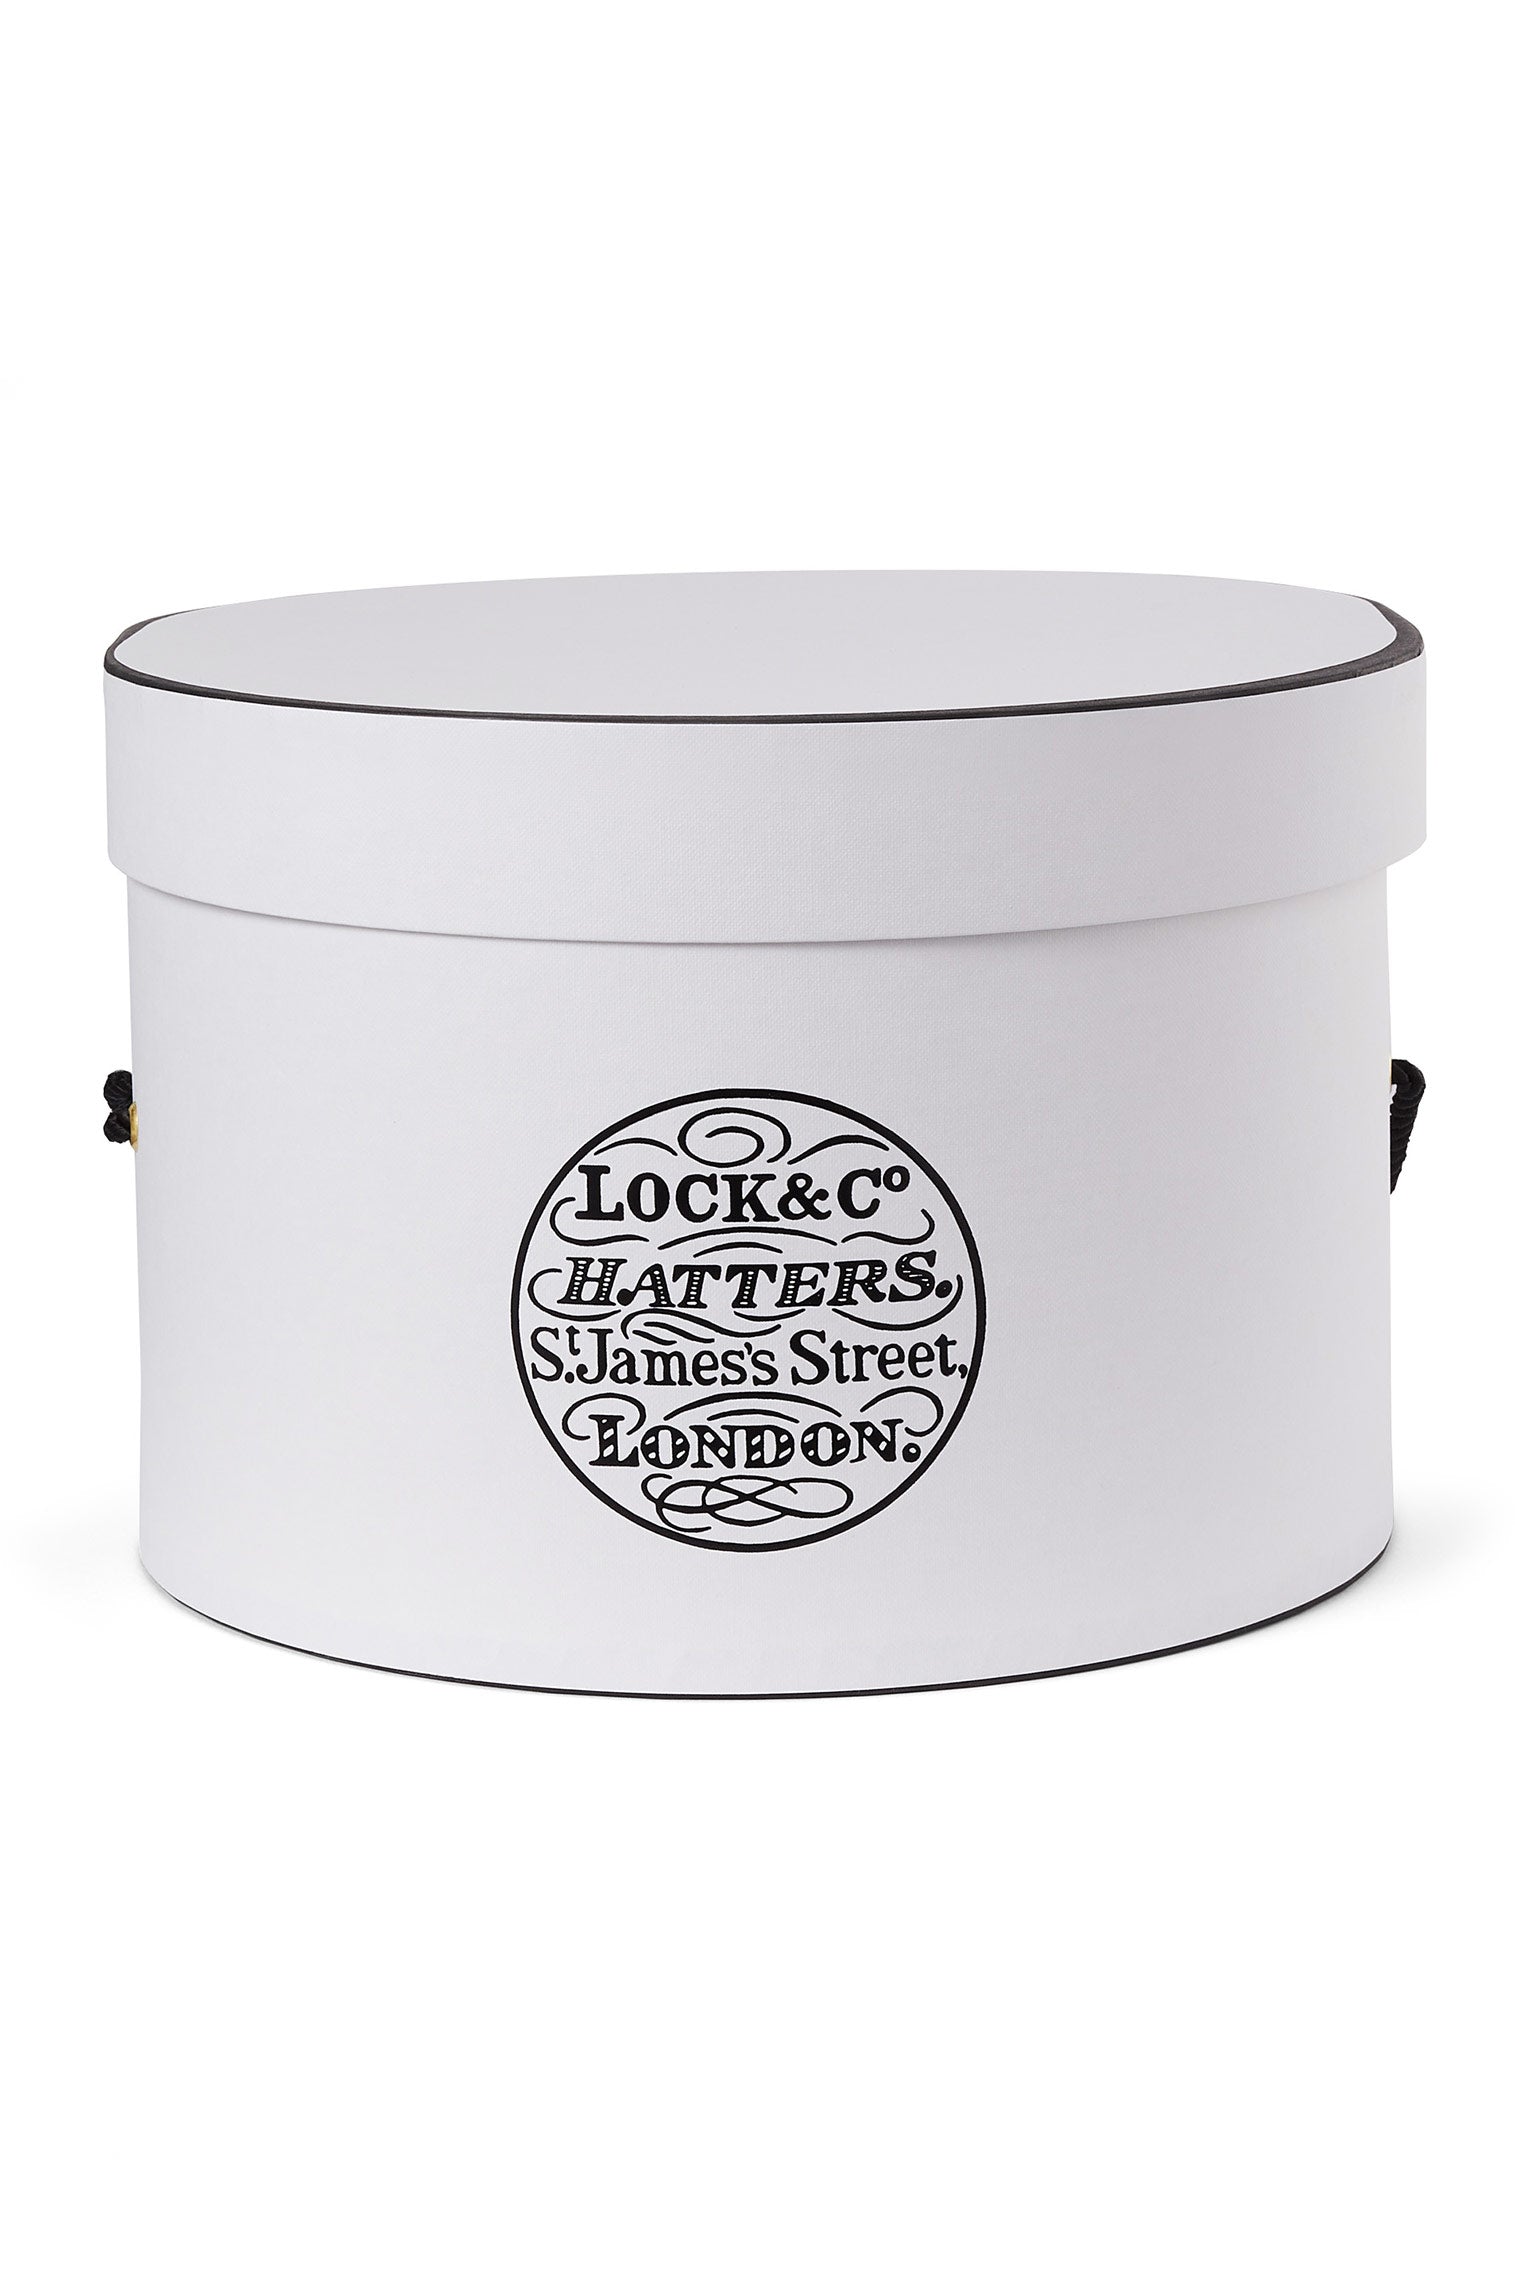 Hat box small - Accessories - Lock & Co. Hatters London UK